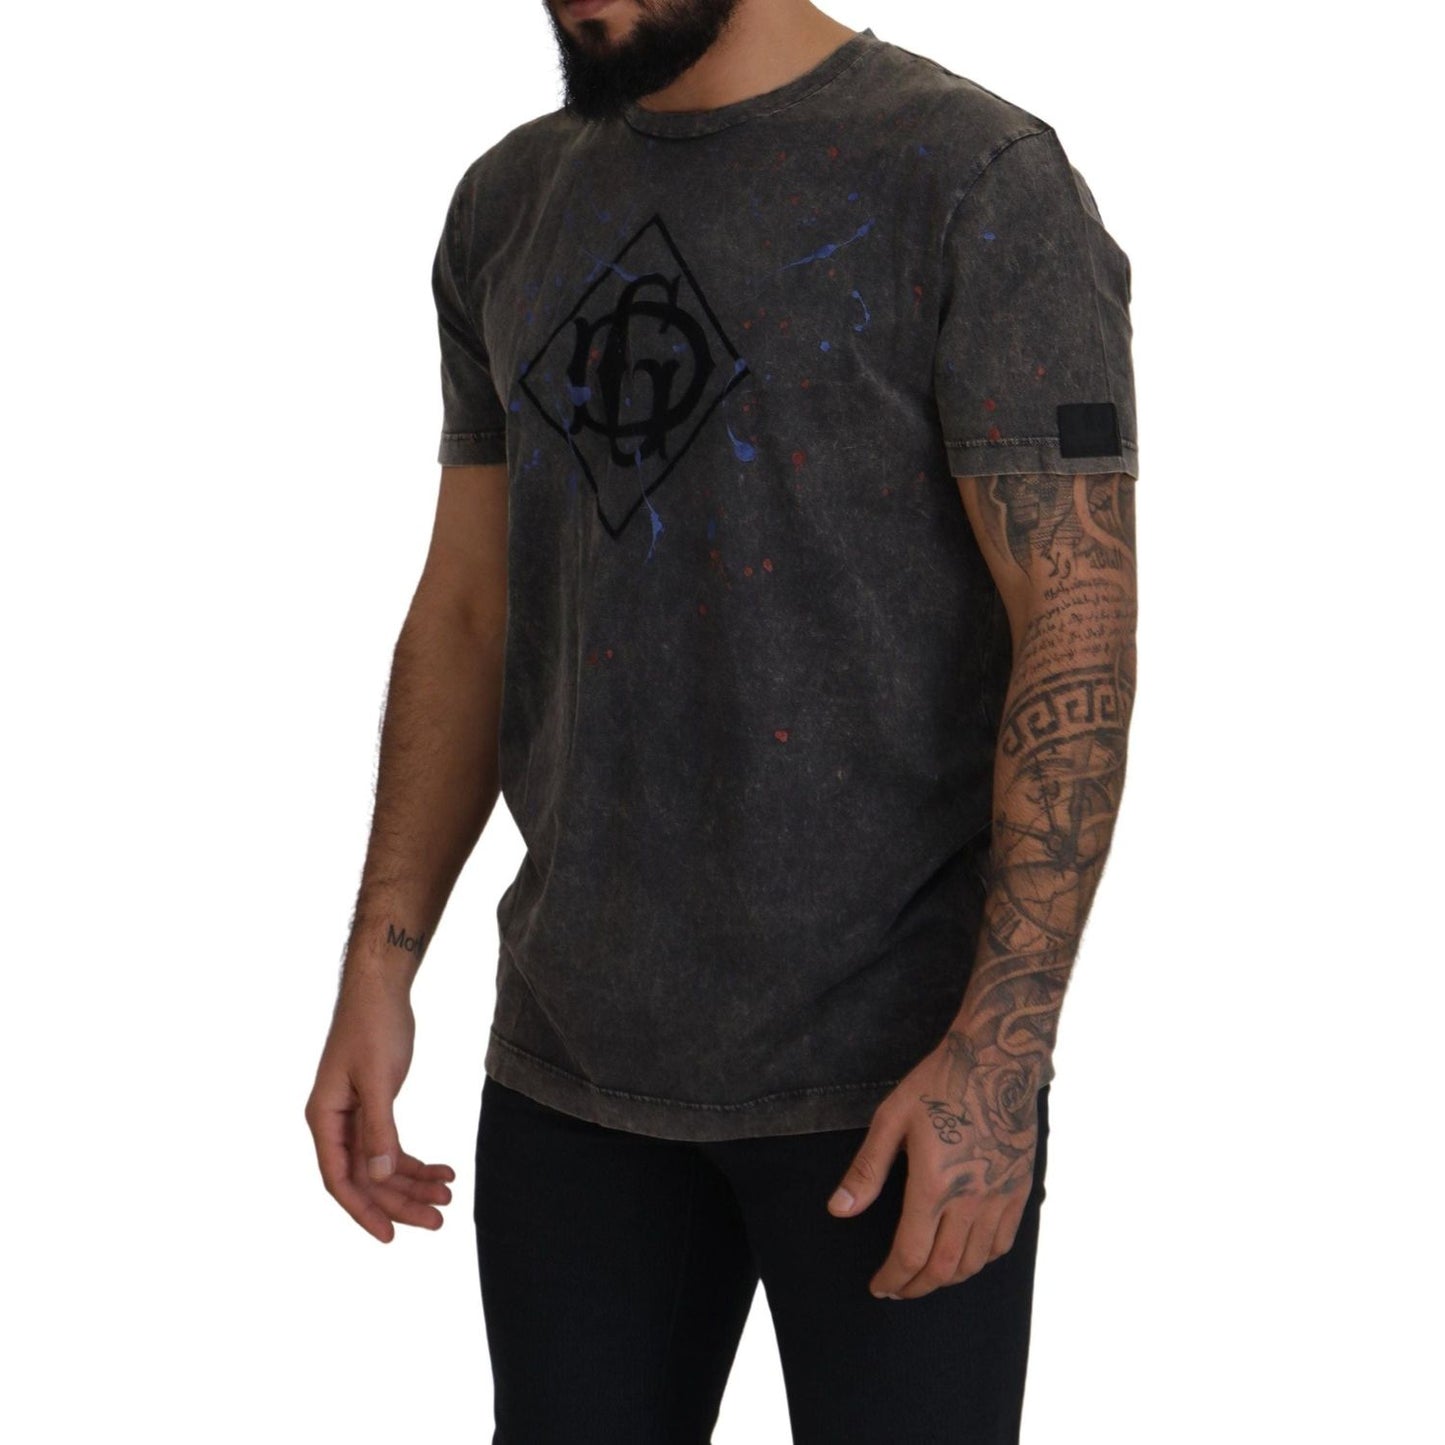 Dolce & Gabbana Elevated Grey Cotton Tee with Discolored DG Logo gray-discolored-effect-dg-logo-t-shirt